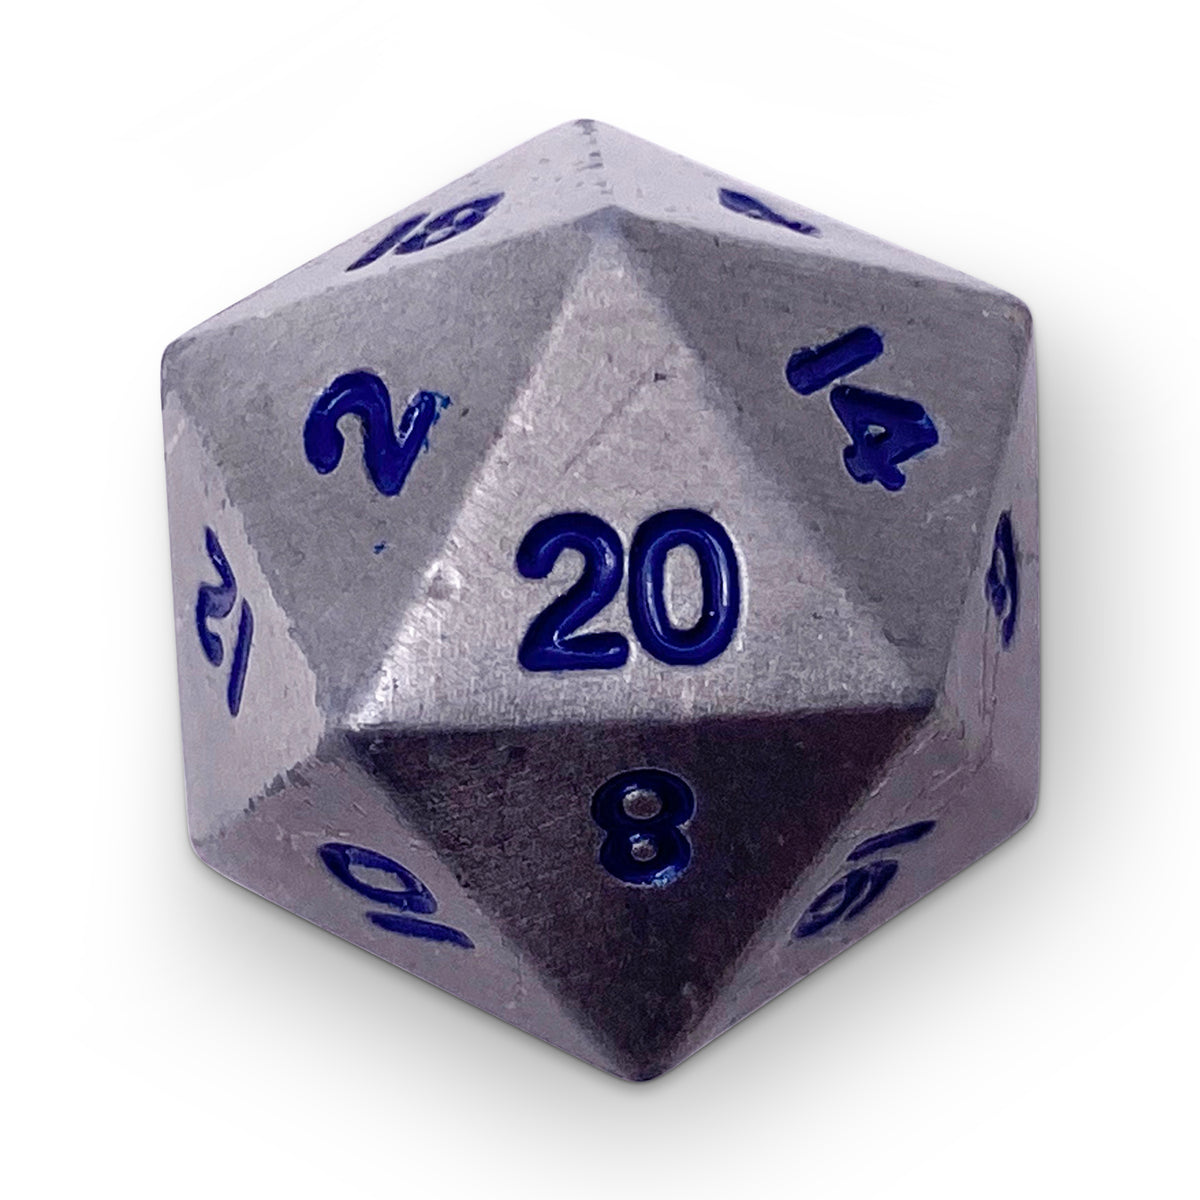 Single Alloy D20 in Atomic Metal by